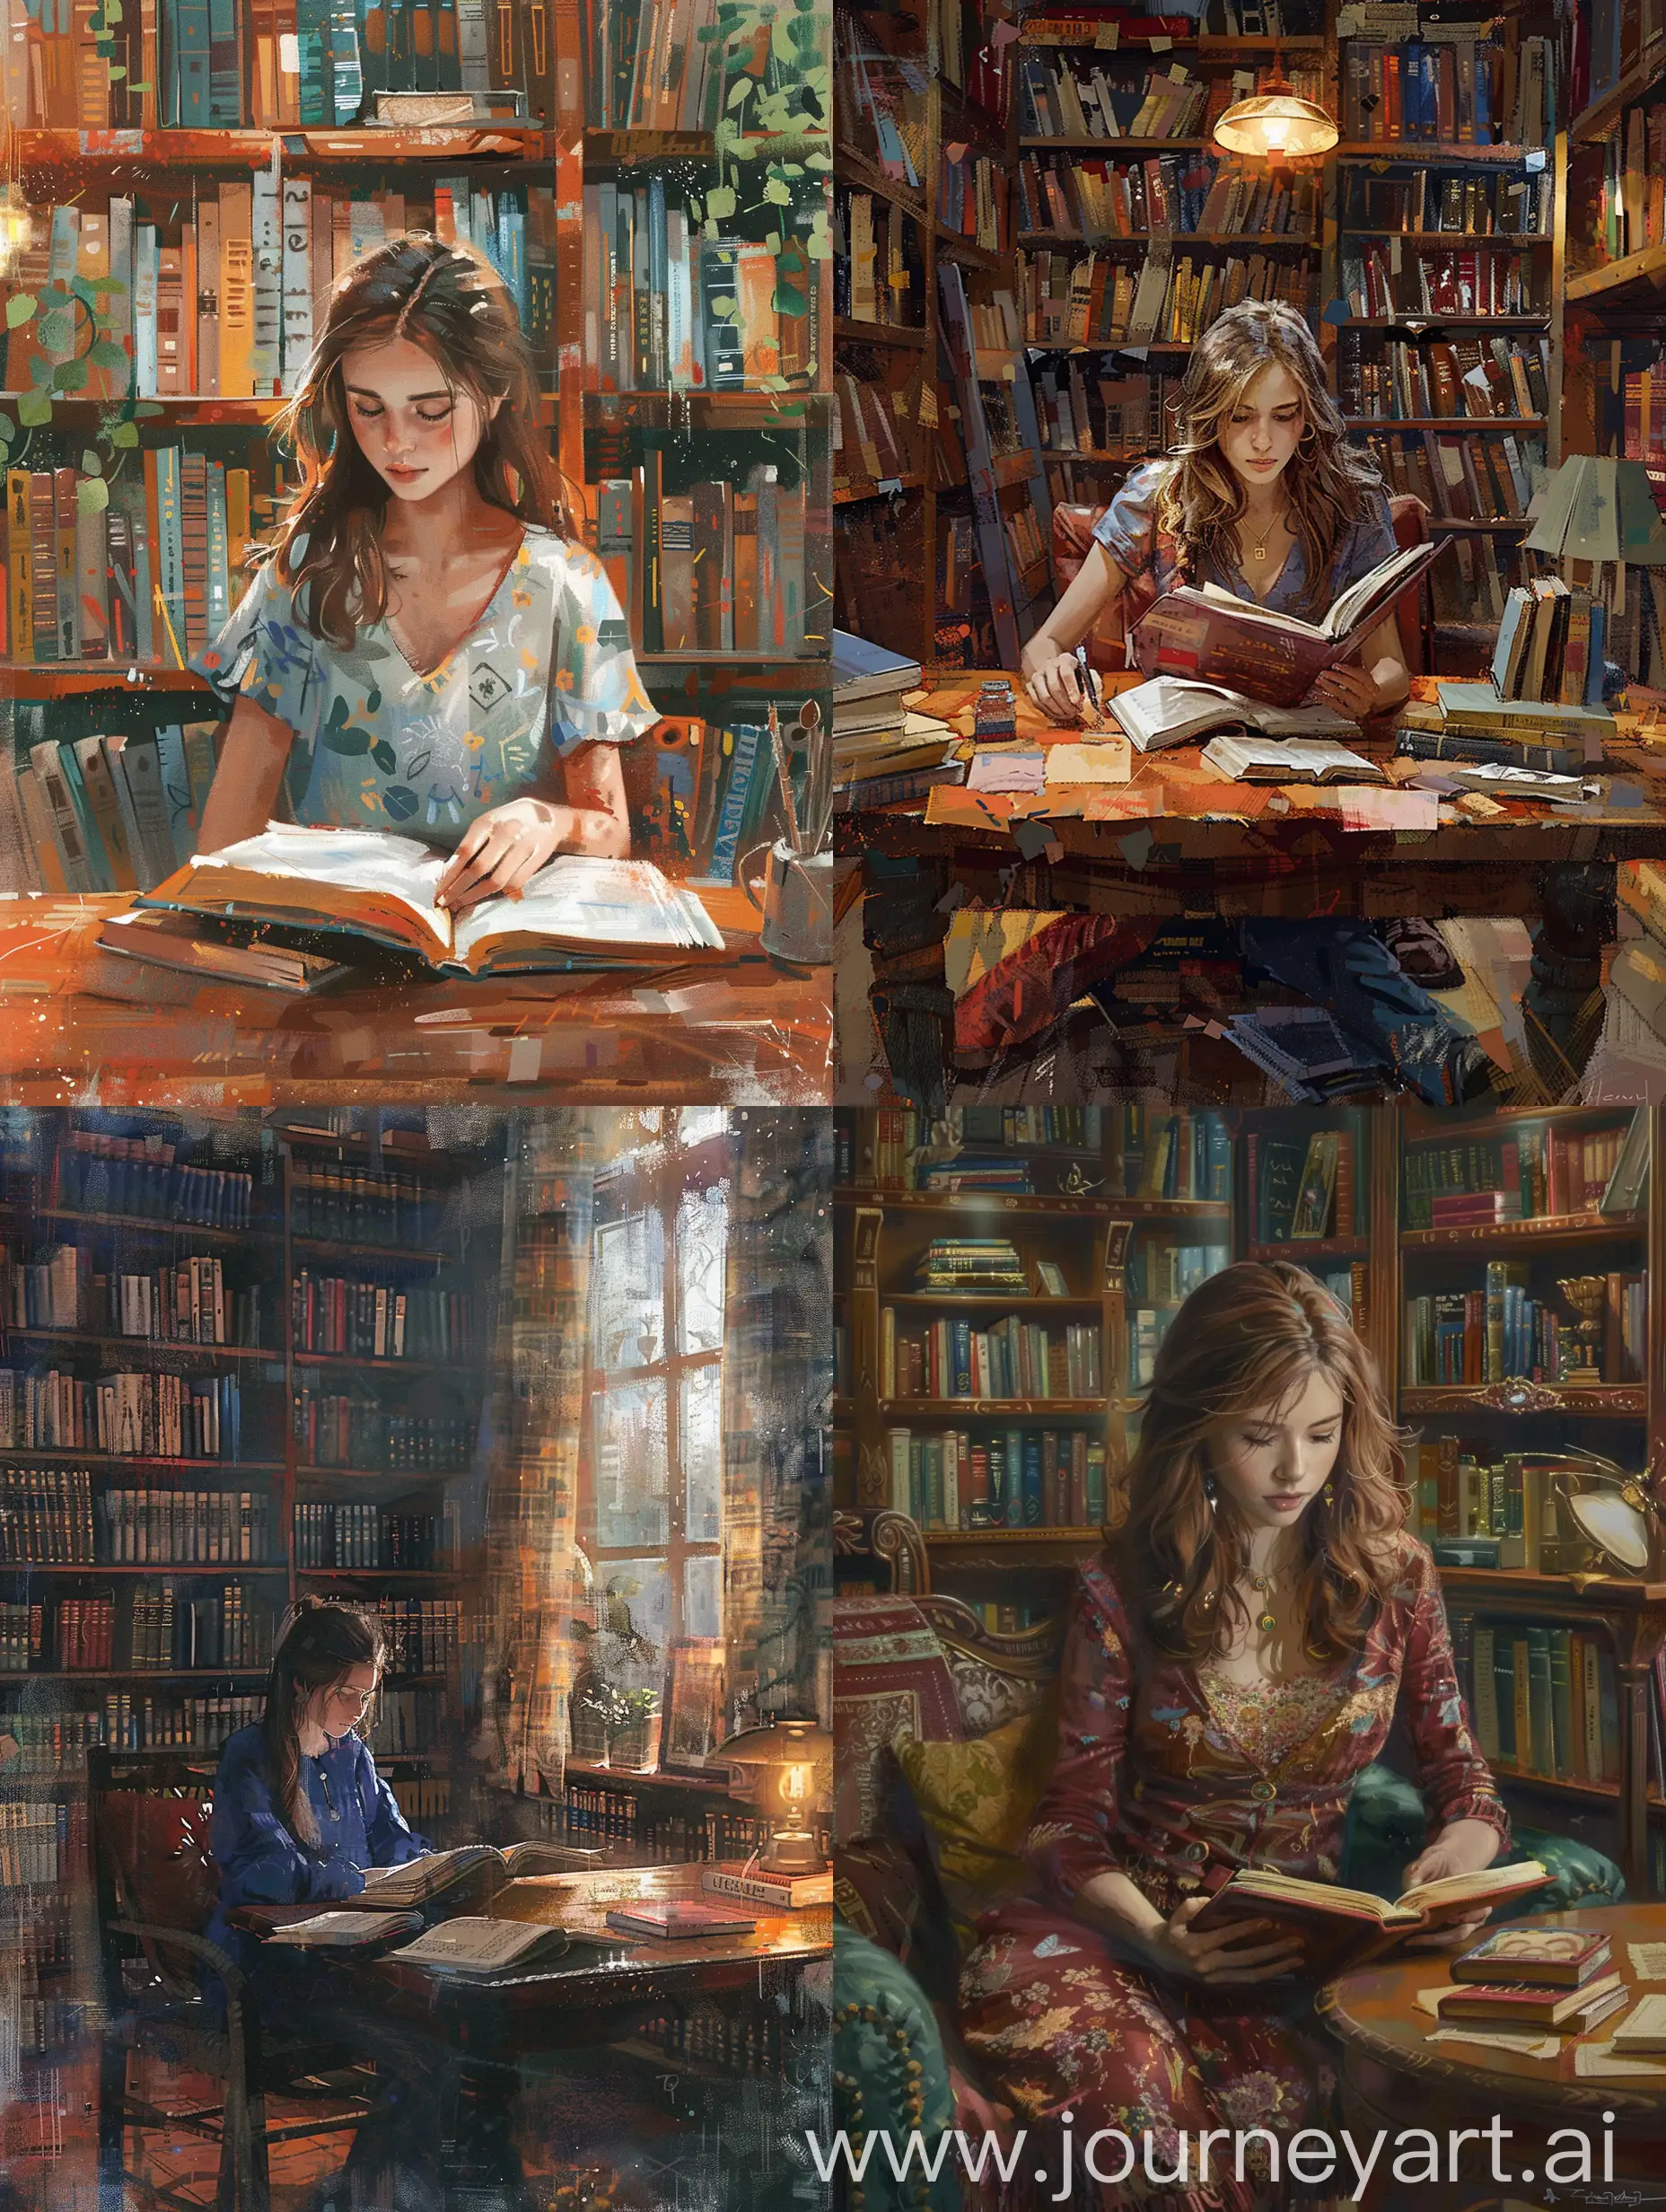 Enchanting-Reading-Retreat-Cozy-Girl-Amidst-Books-in-a-Beautiful-Library